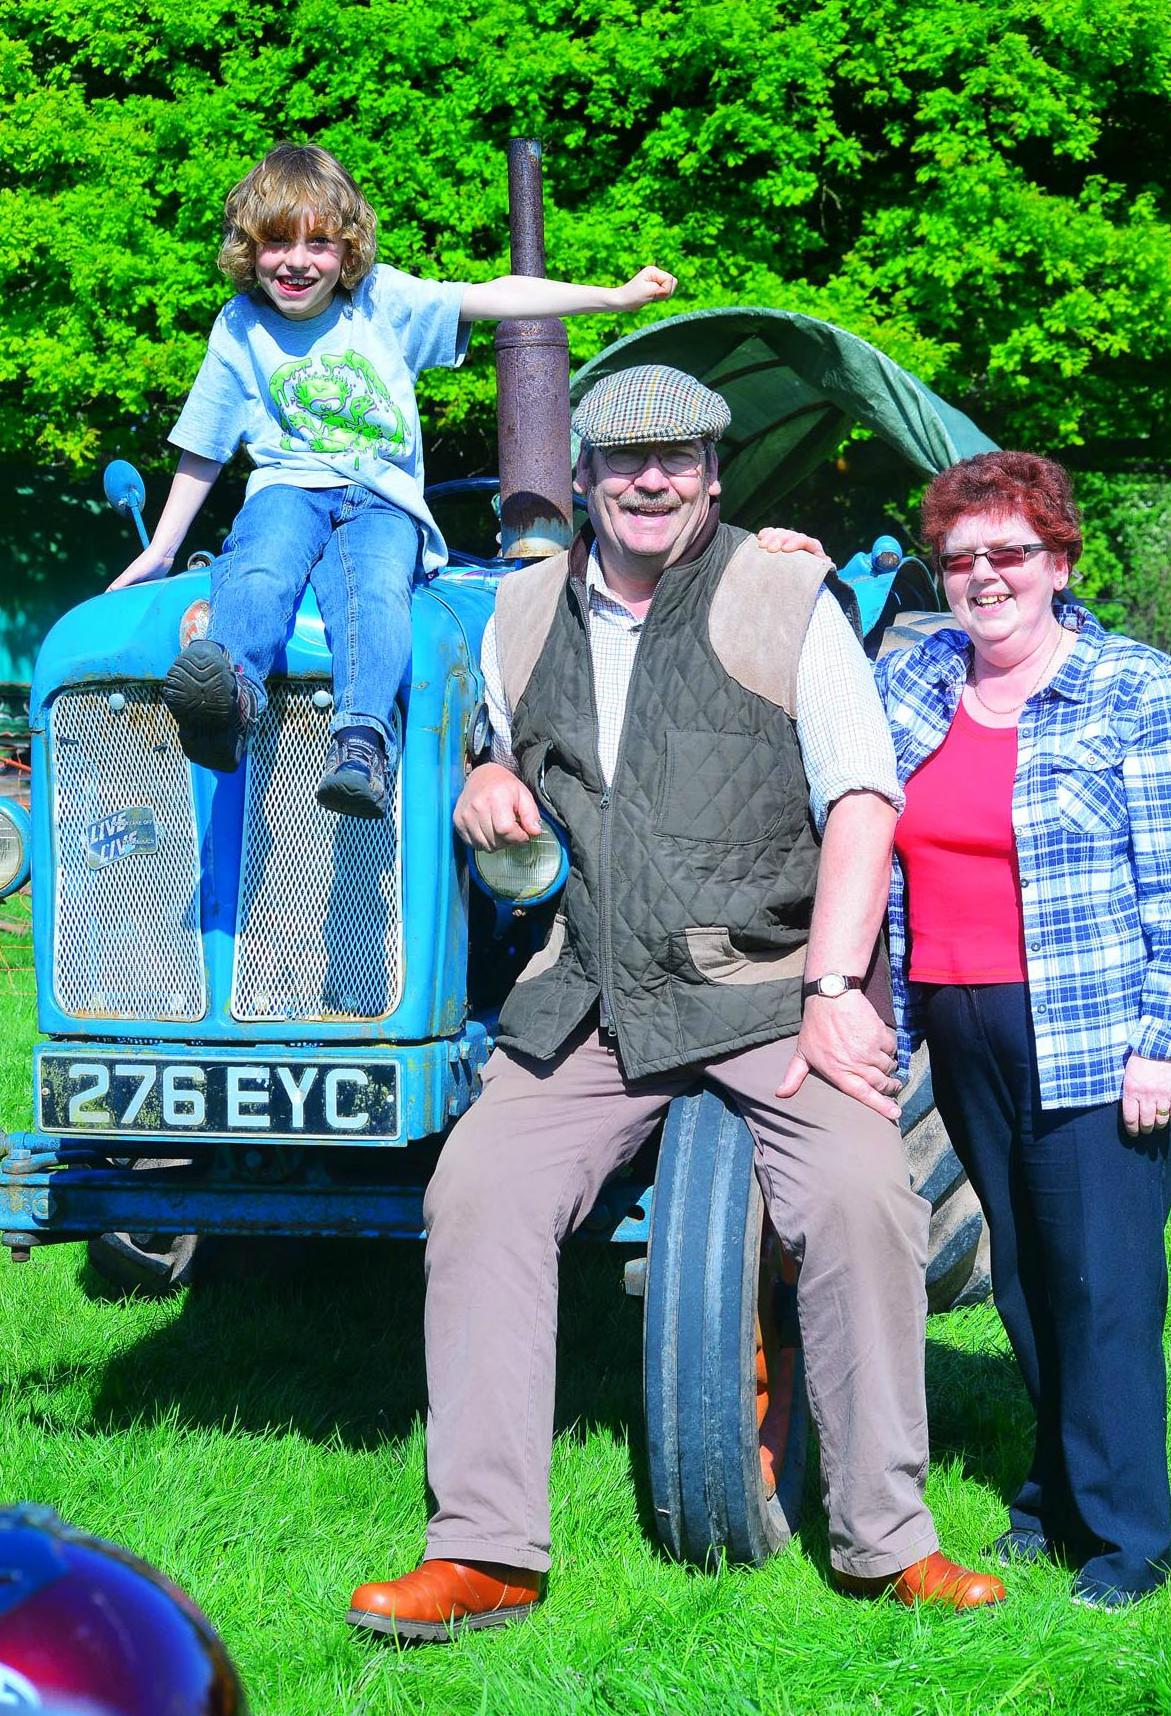 TRACTOR FUN: Oliver, David and Barbara Chidley